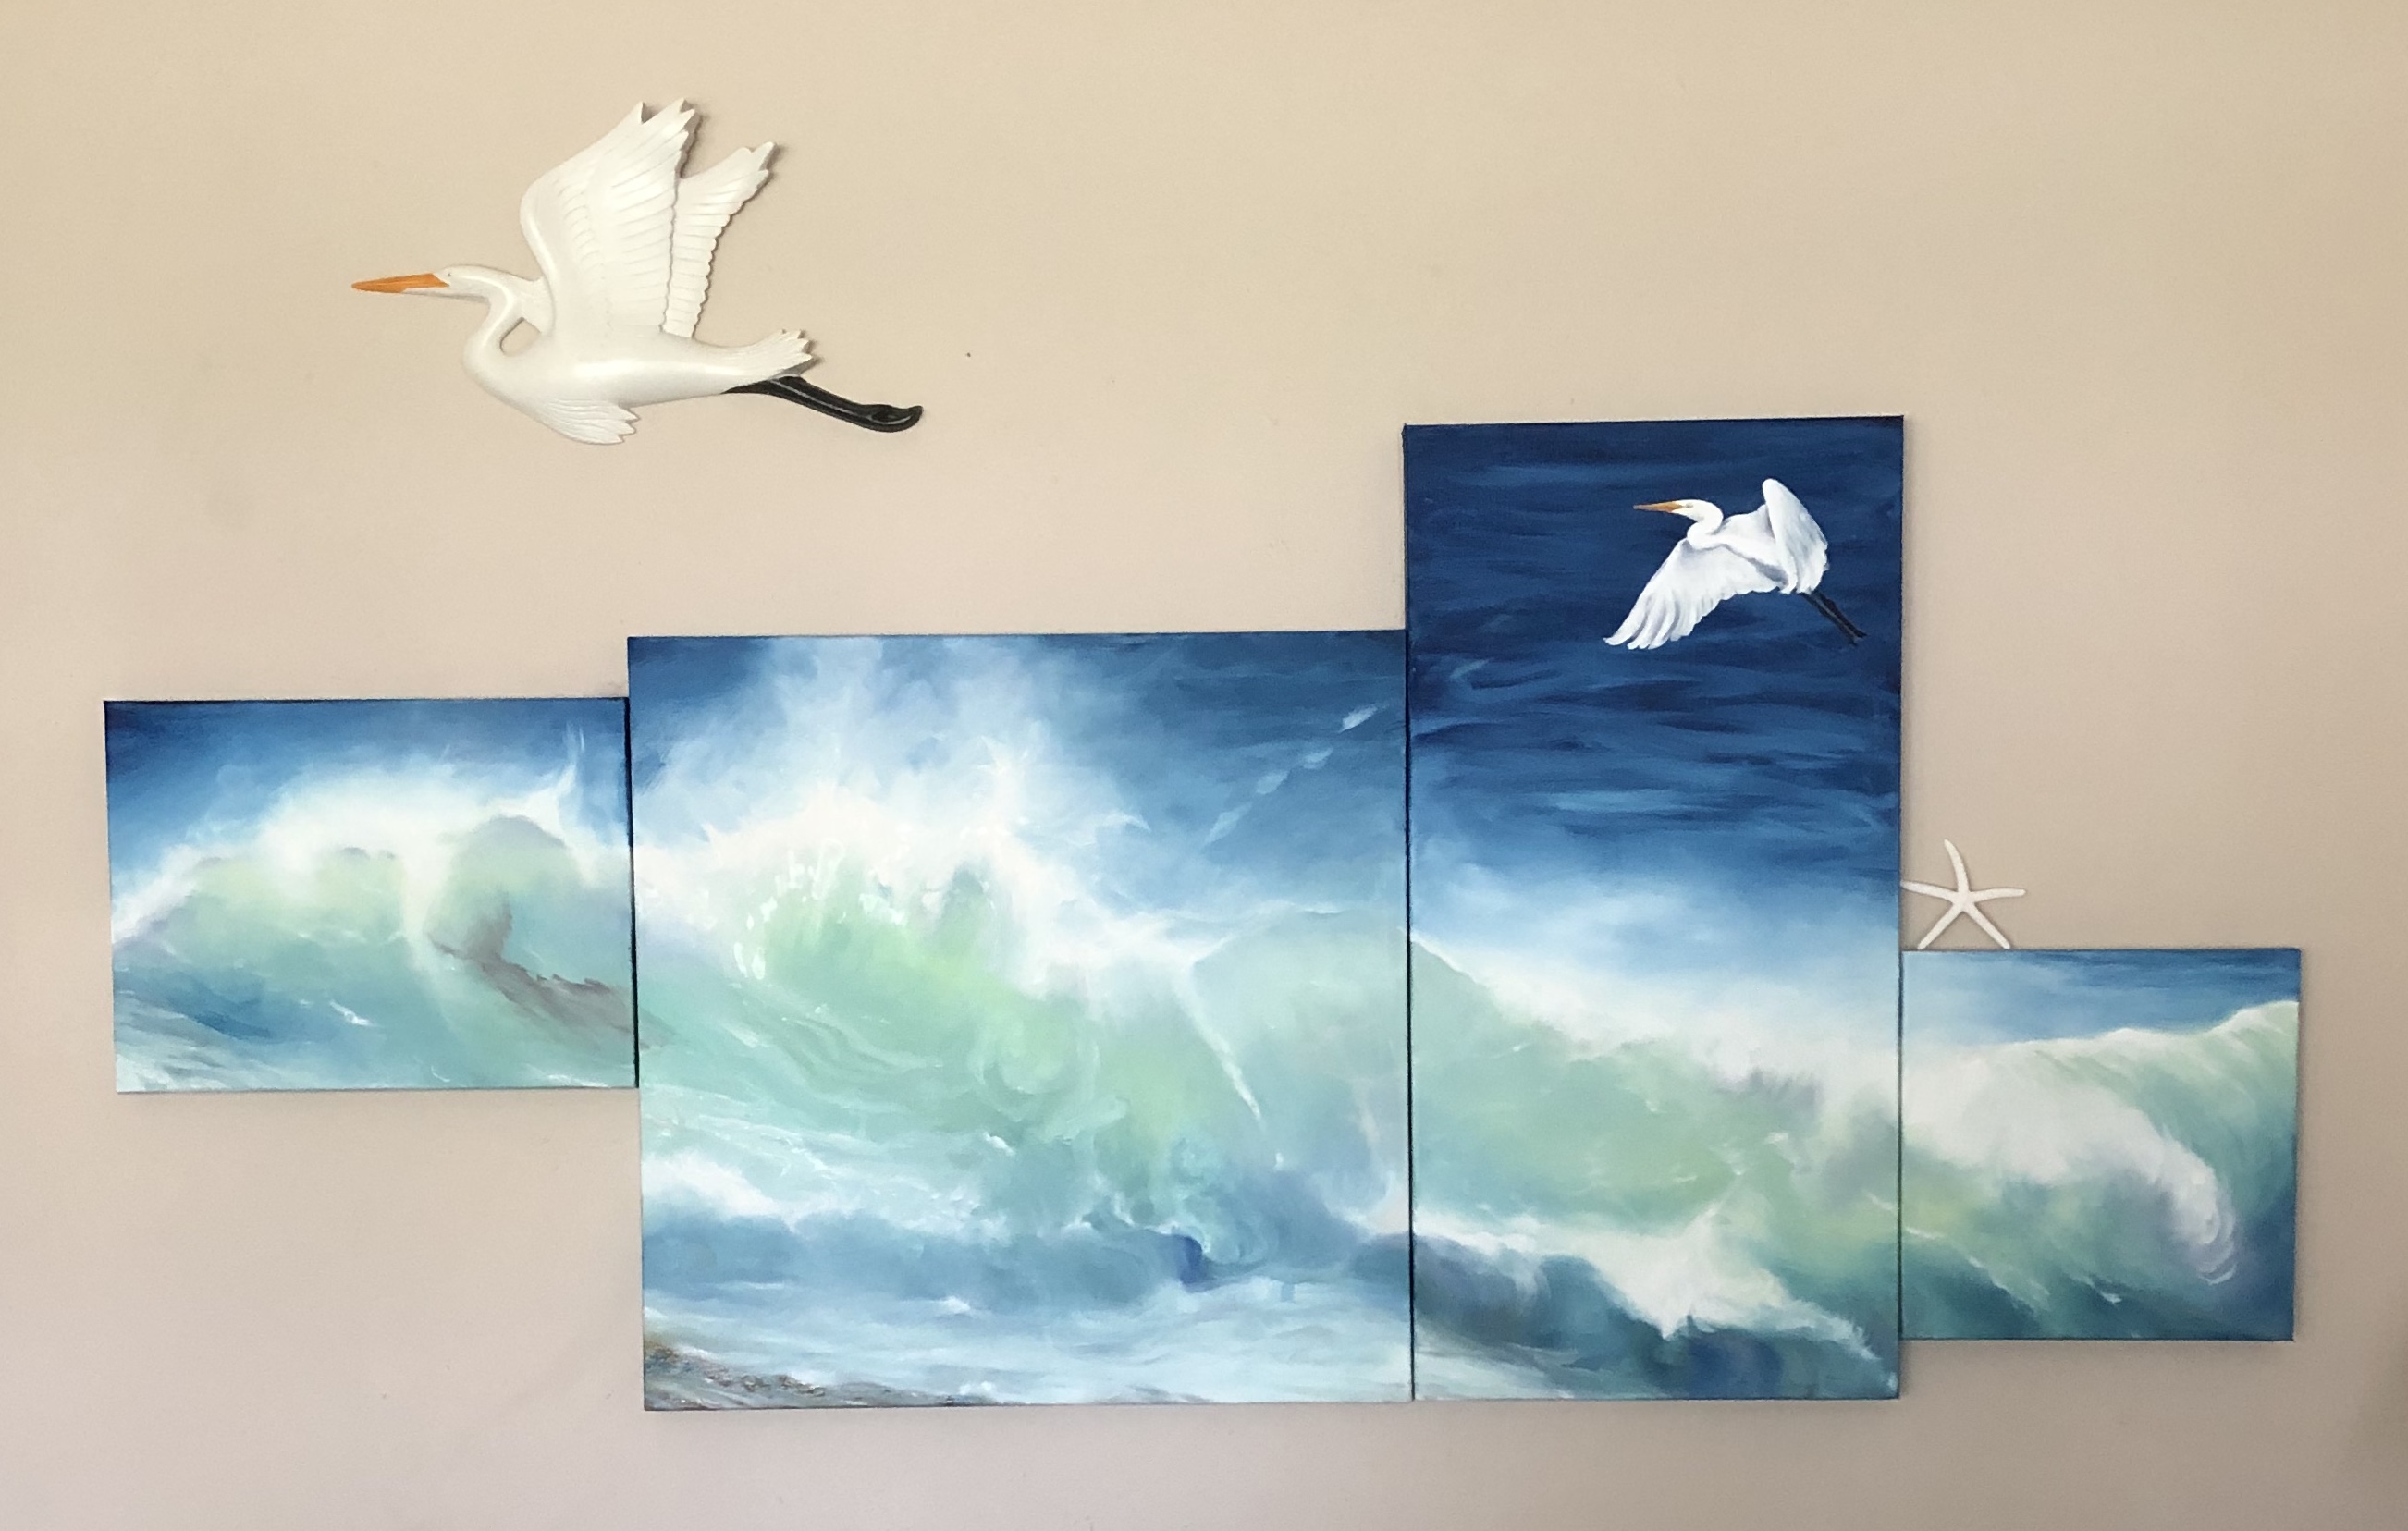 1000 Voices 8 - 30 in x 67 in, Oil on 4 canvases with composite of Great Egret by Lazanna Paskalidis $4500